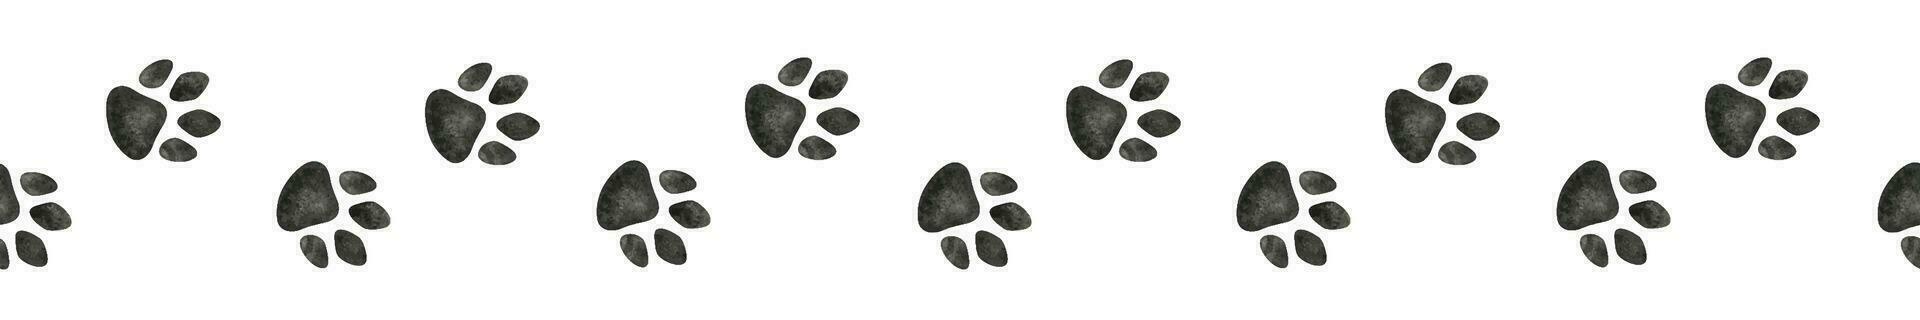 Dog or cat paw. Watercolor seamless border. Cute animal footprints for decoration, fabric, design, veterinary clinic, pet store, craft projects, logo, scrapbooking, pet tags. vector